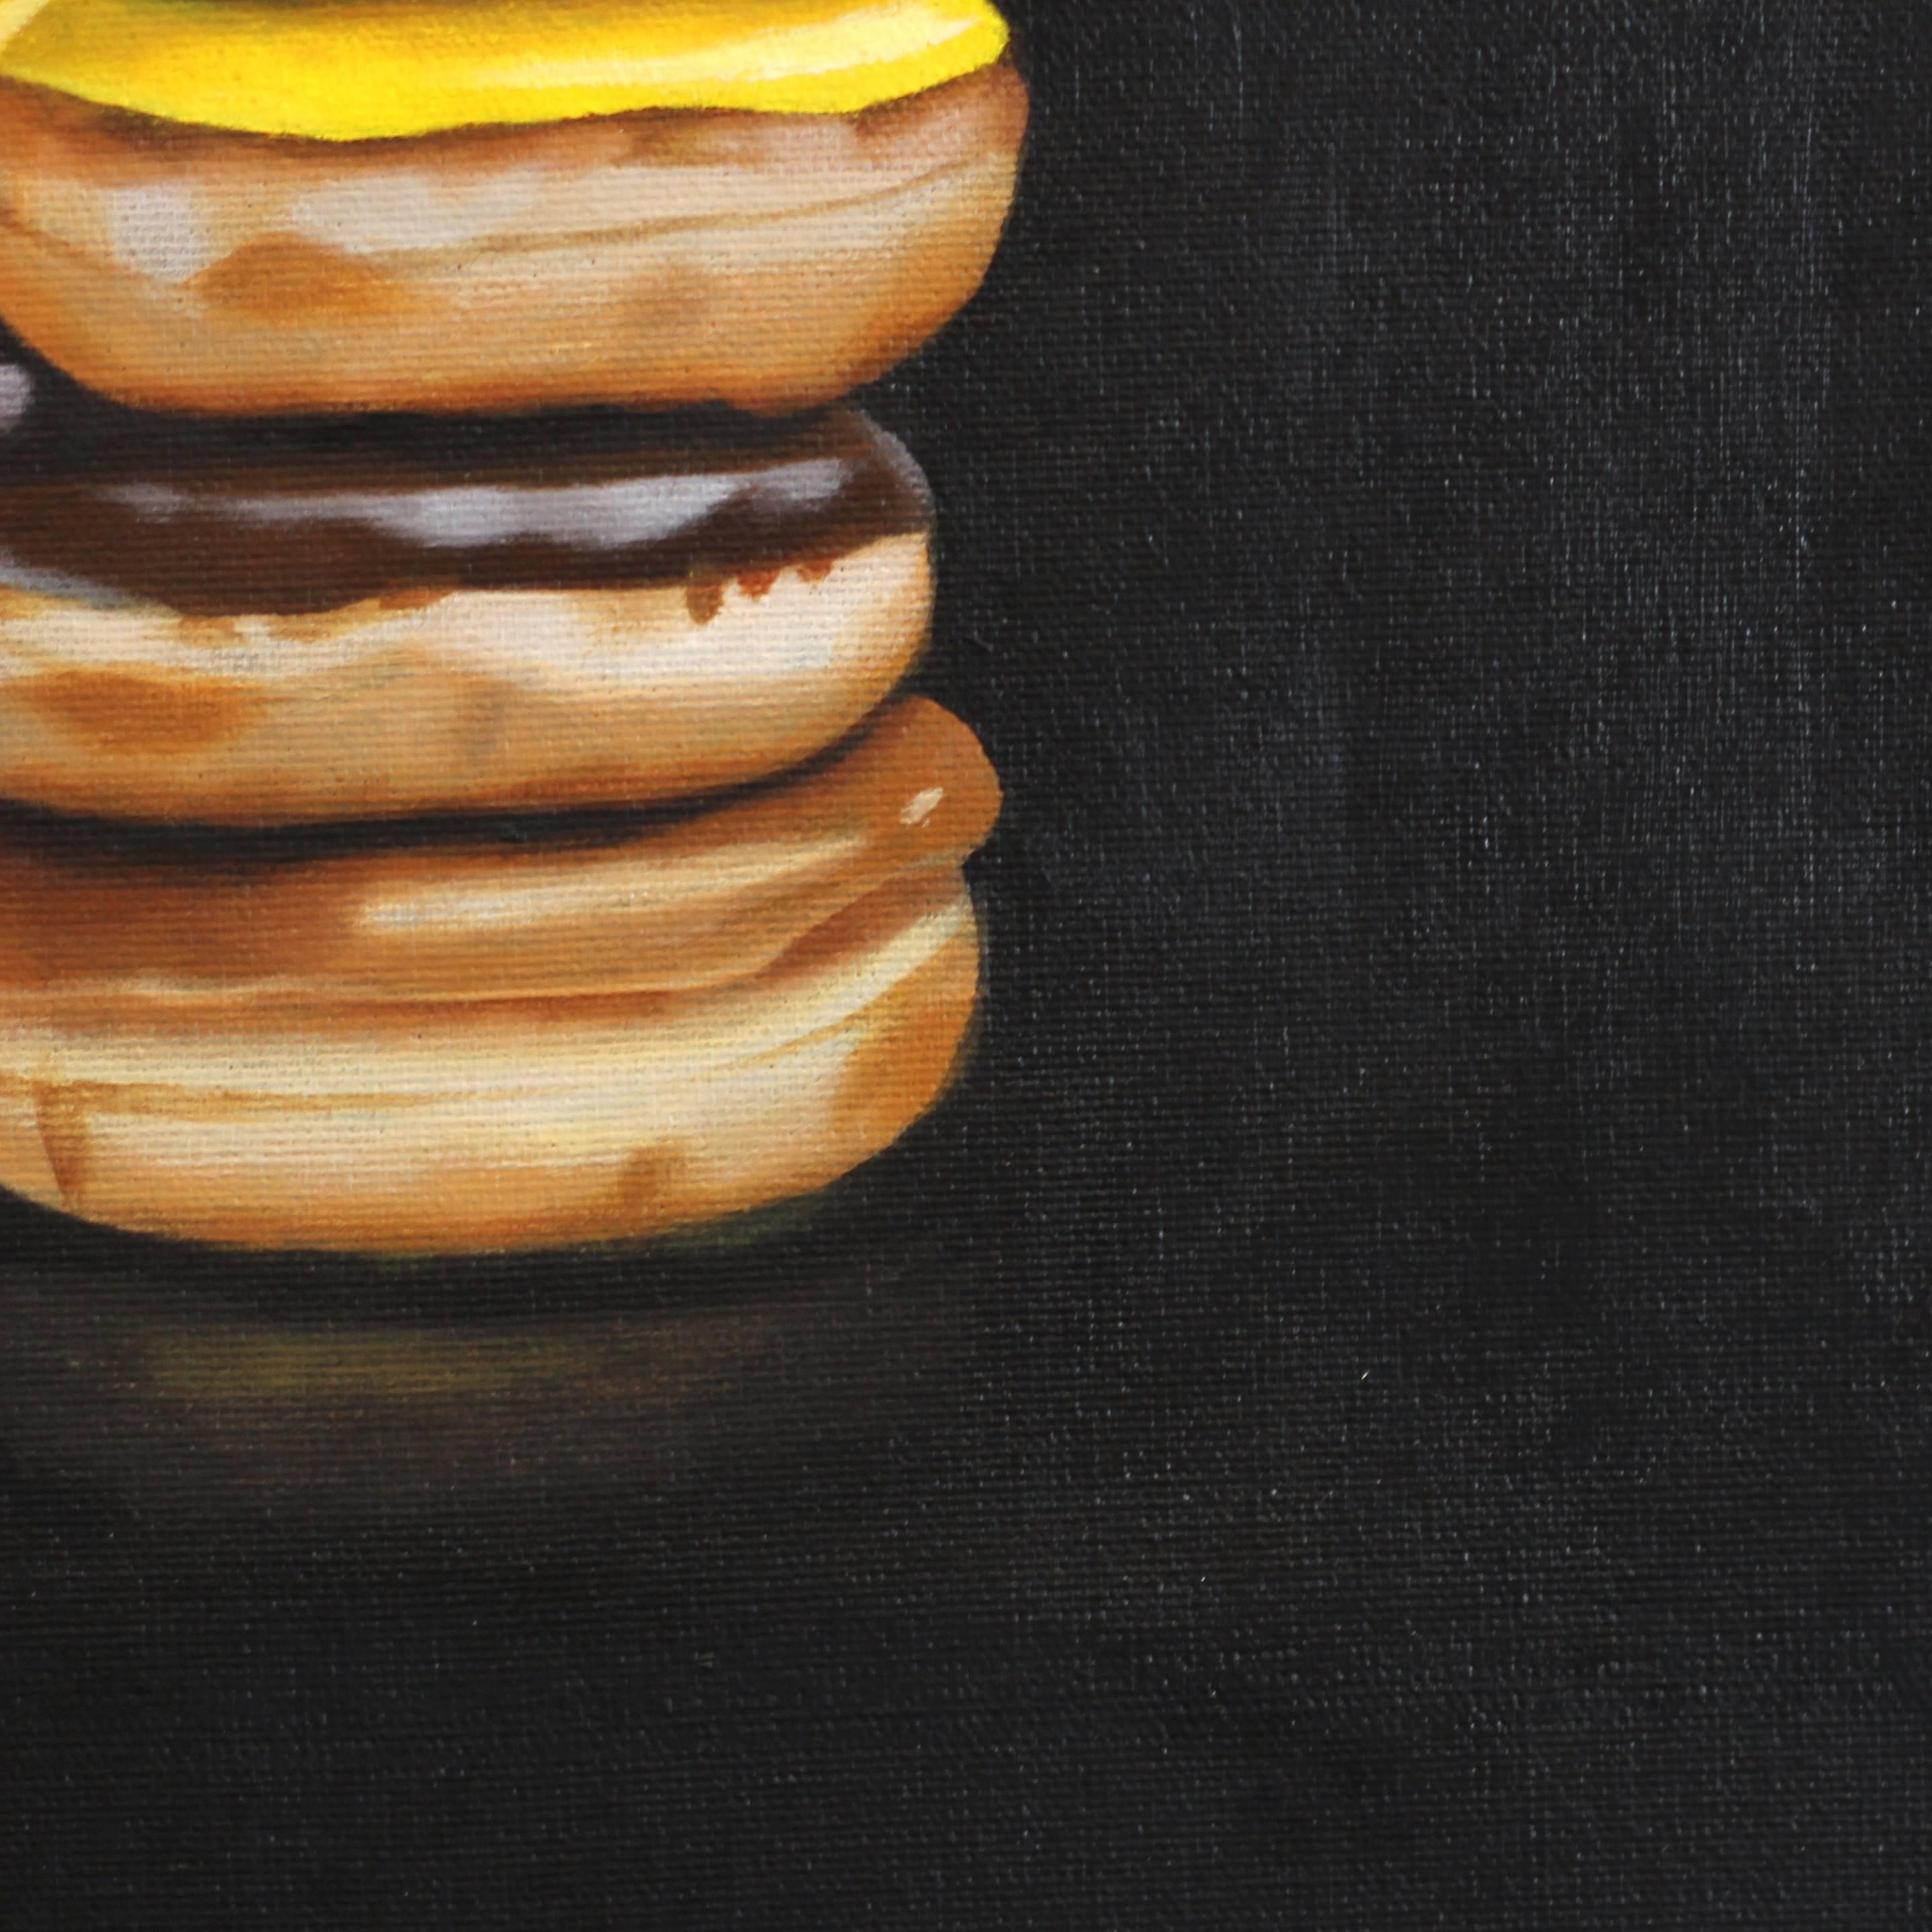 Donuts - Photorealist Painting by Erin Rothstein